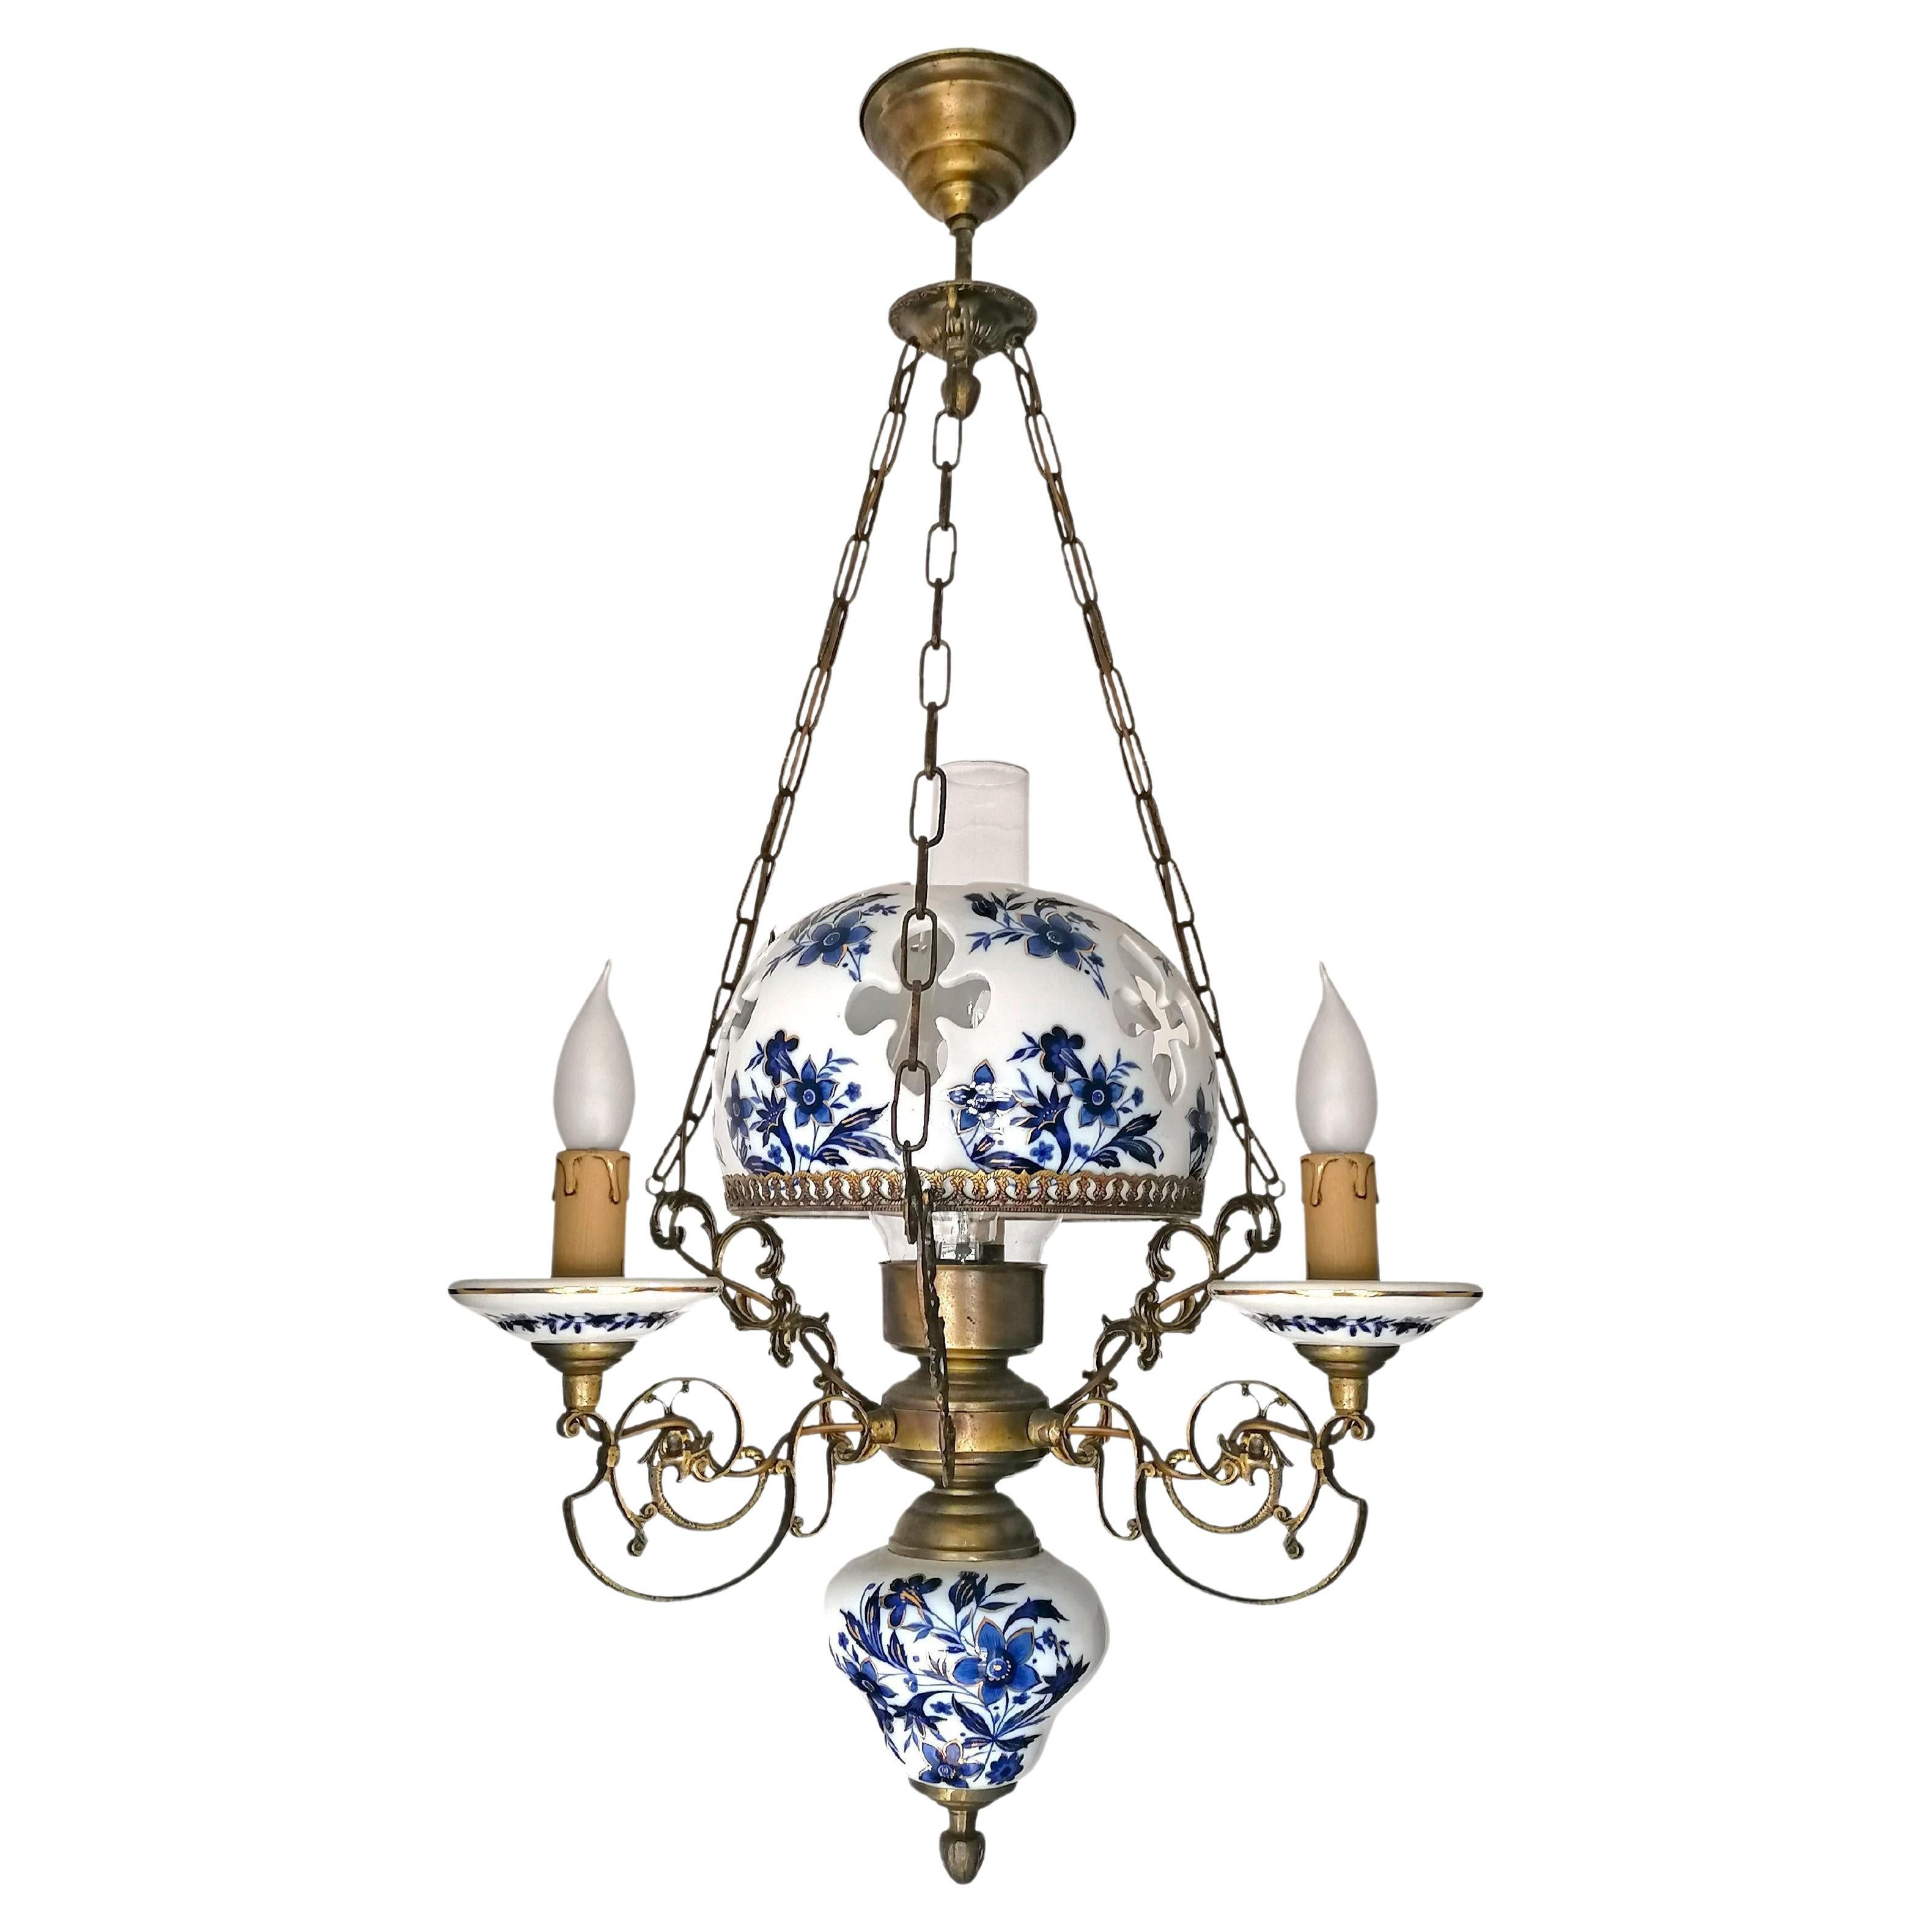 Country Delft Style French Chandelier Oil Lamp Blue & Gold Hand Painted Carved Porcelain